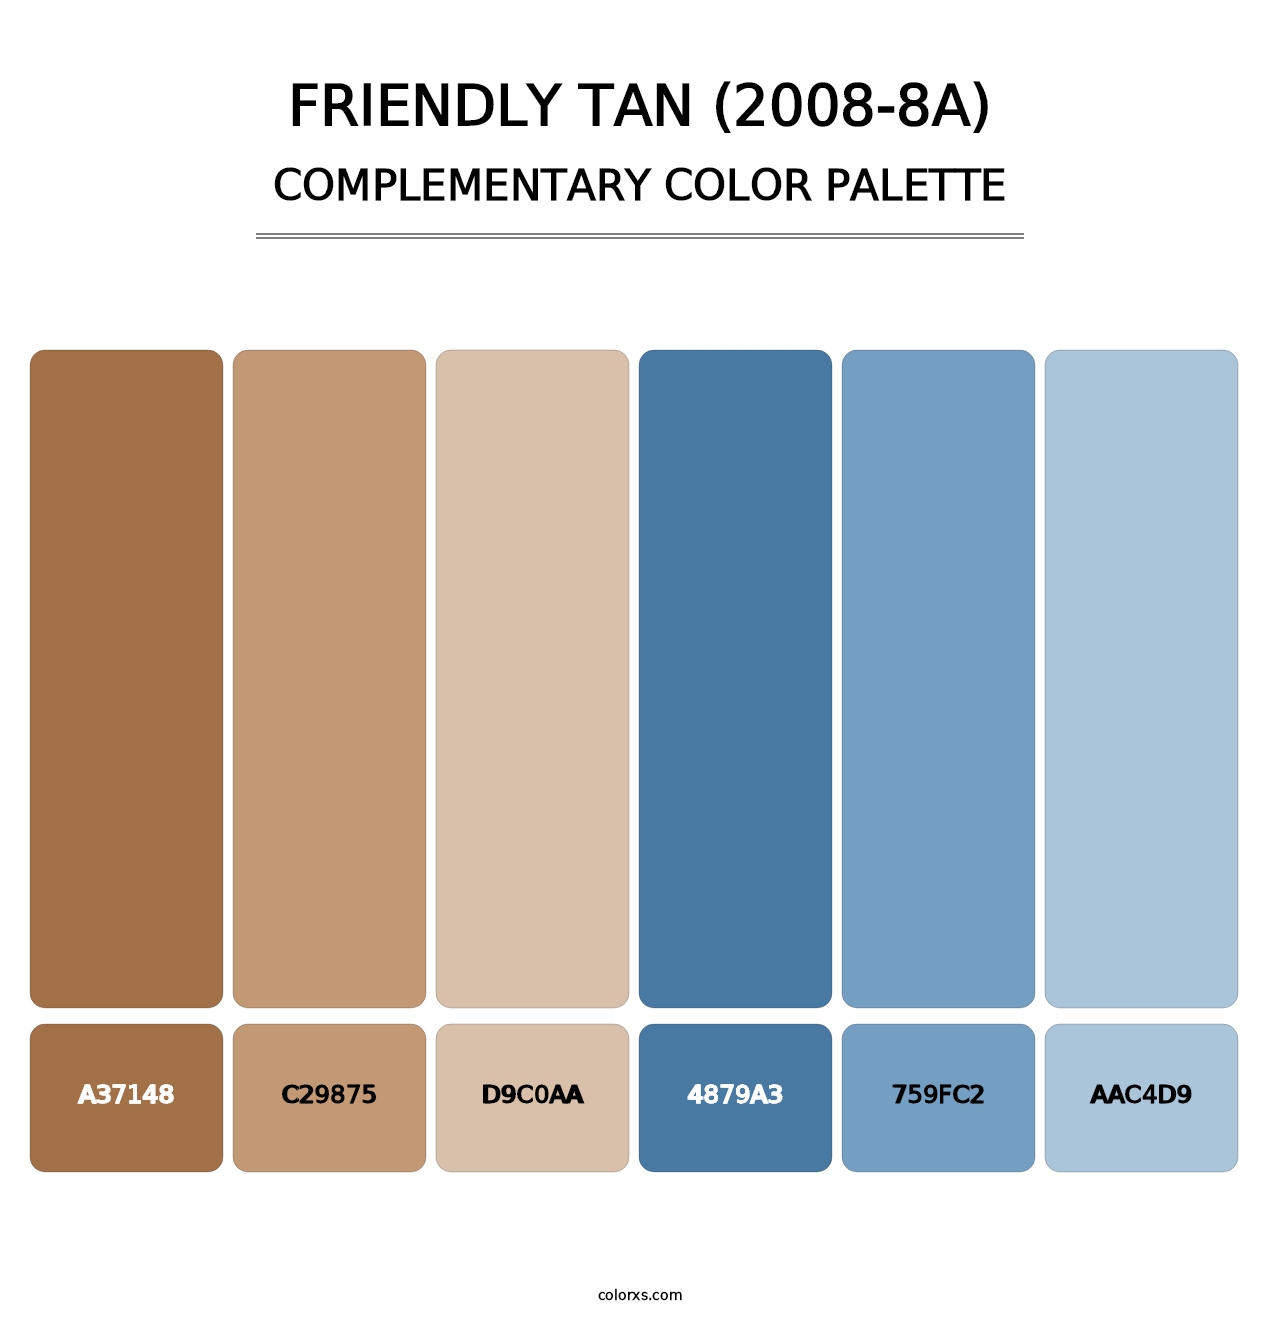 Friendly Tan (2008-8A) - Complementary Color Palette